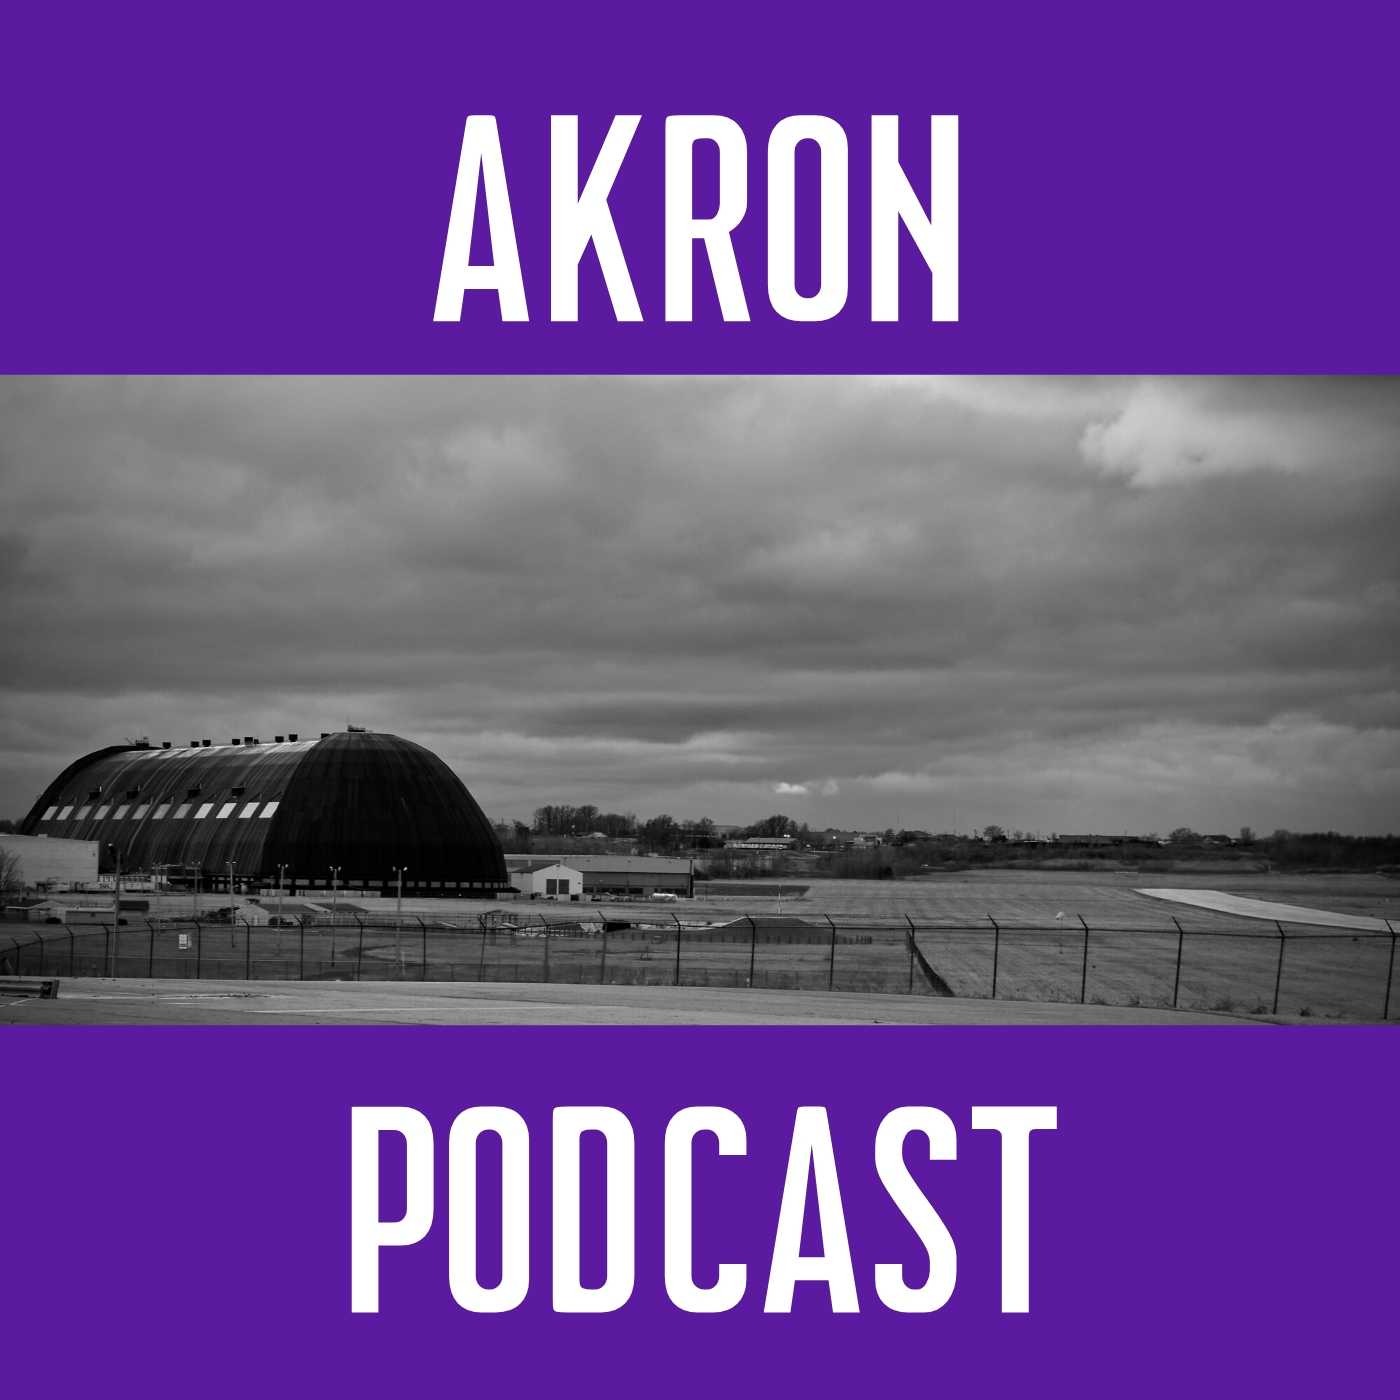 What to Expect from the Akron Podcast